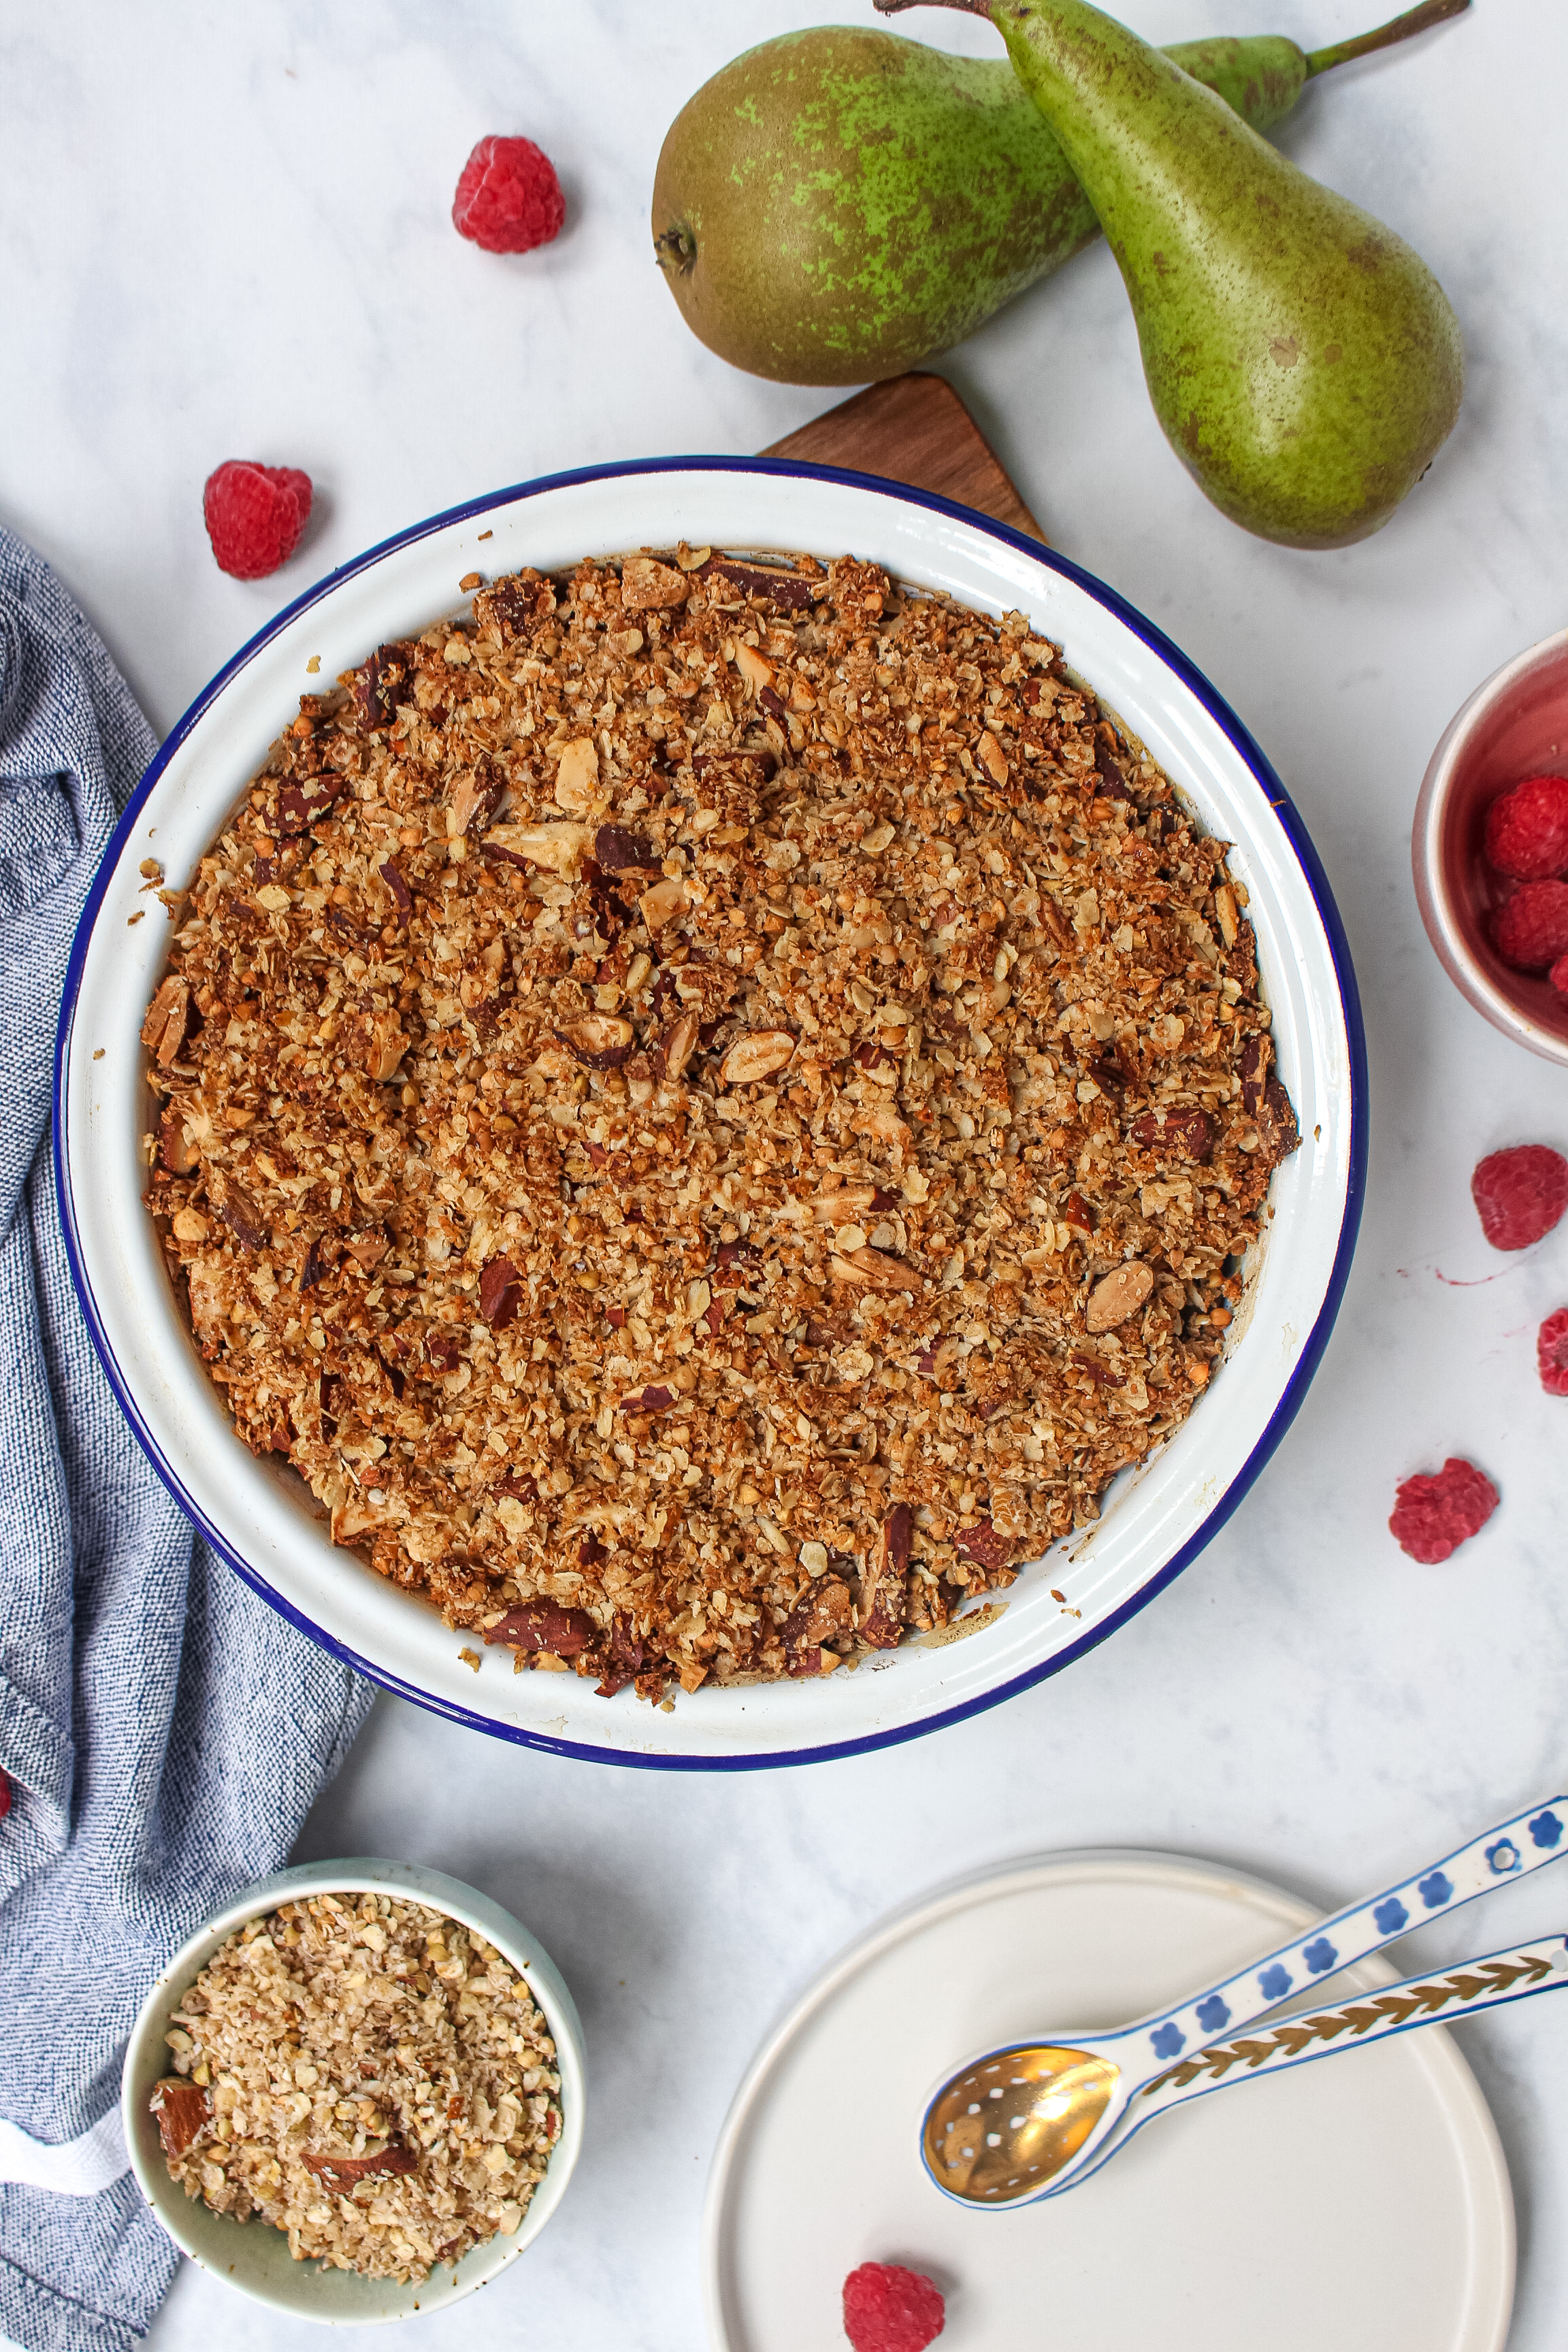 Pear, Cardamom and Almond Crumble